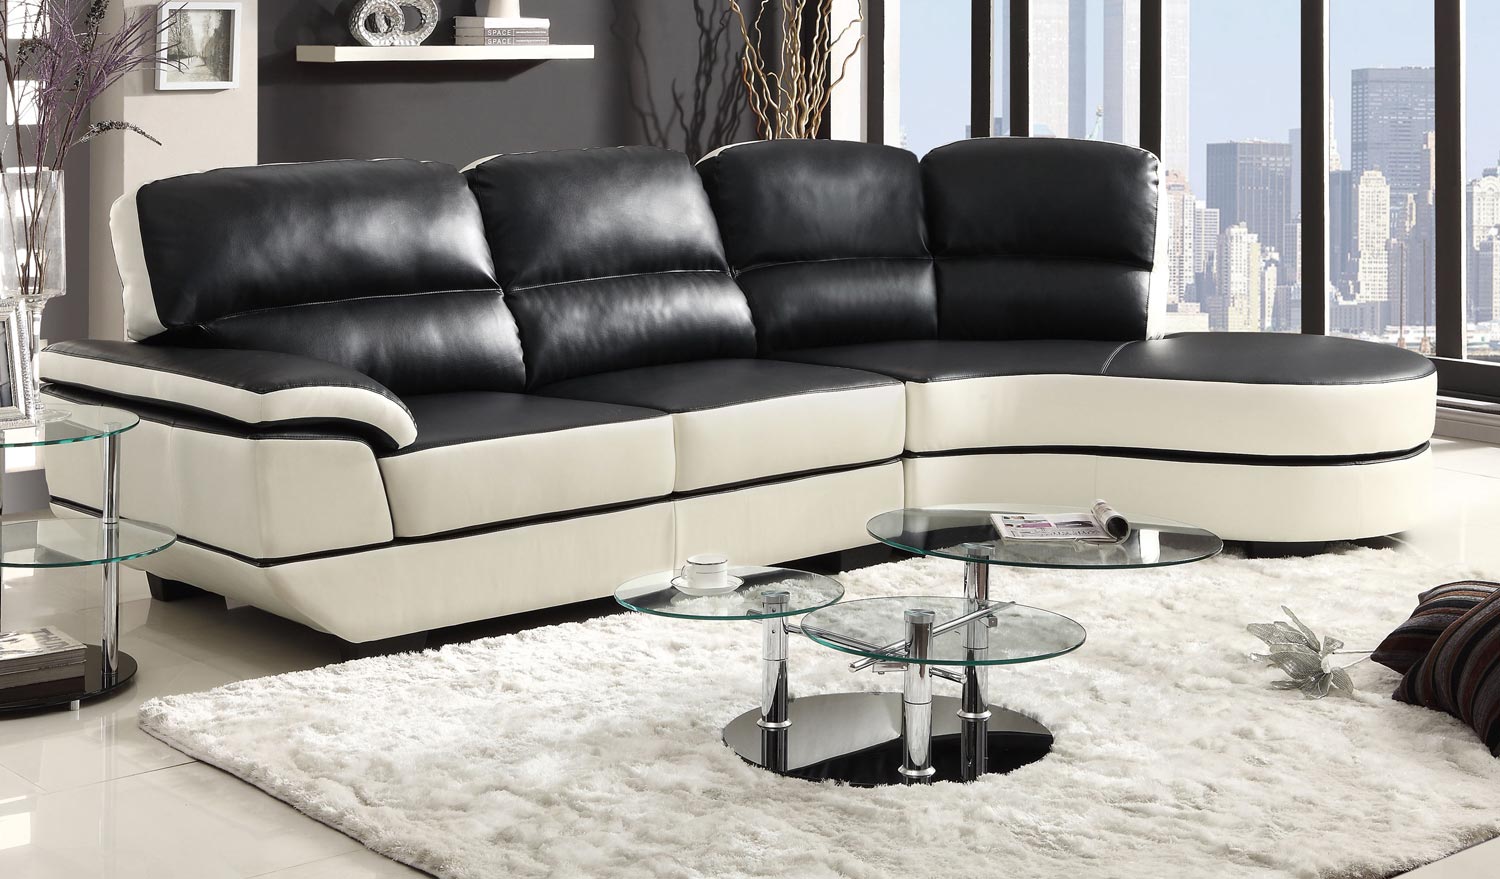 Coaster Reese Sectional Sofa - Black/White 503630 at Homelement.com